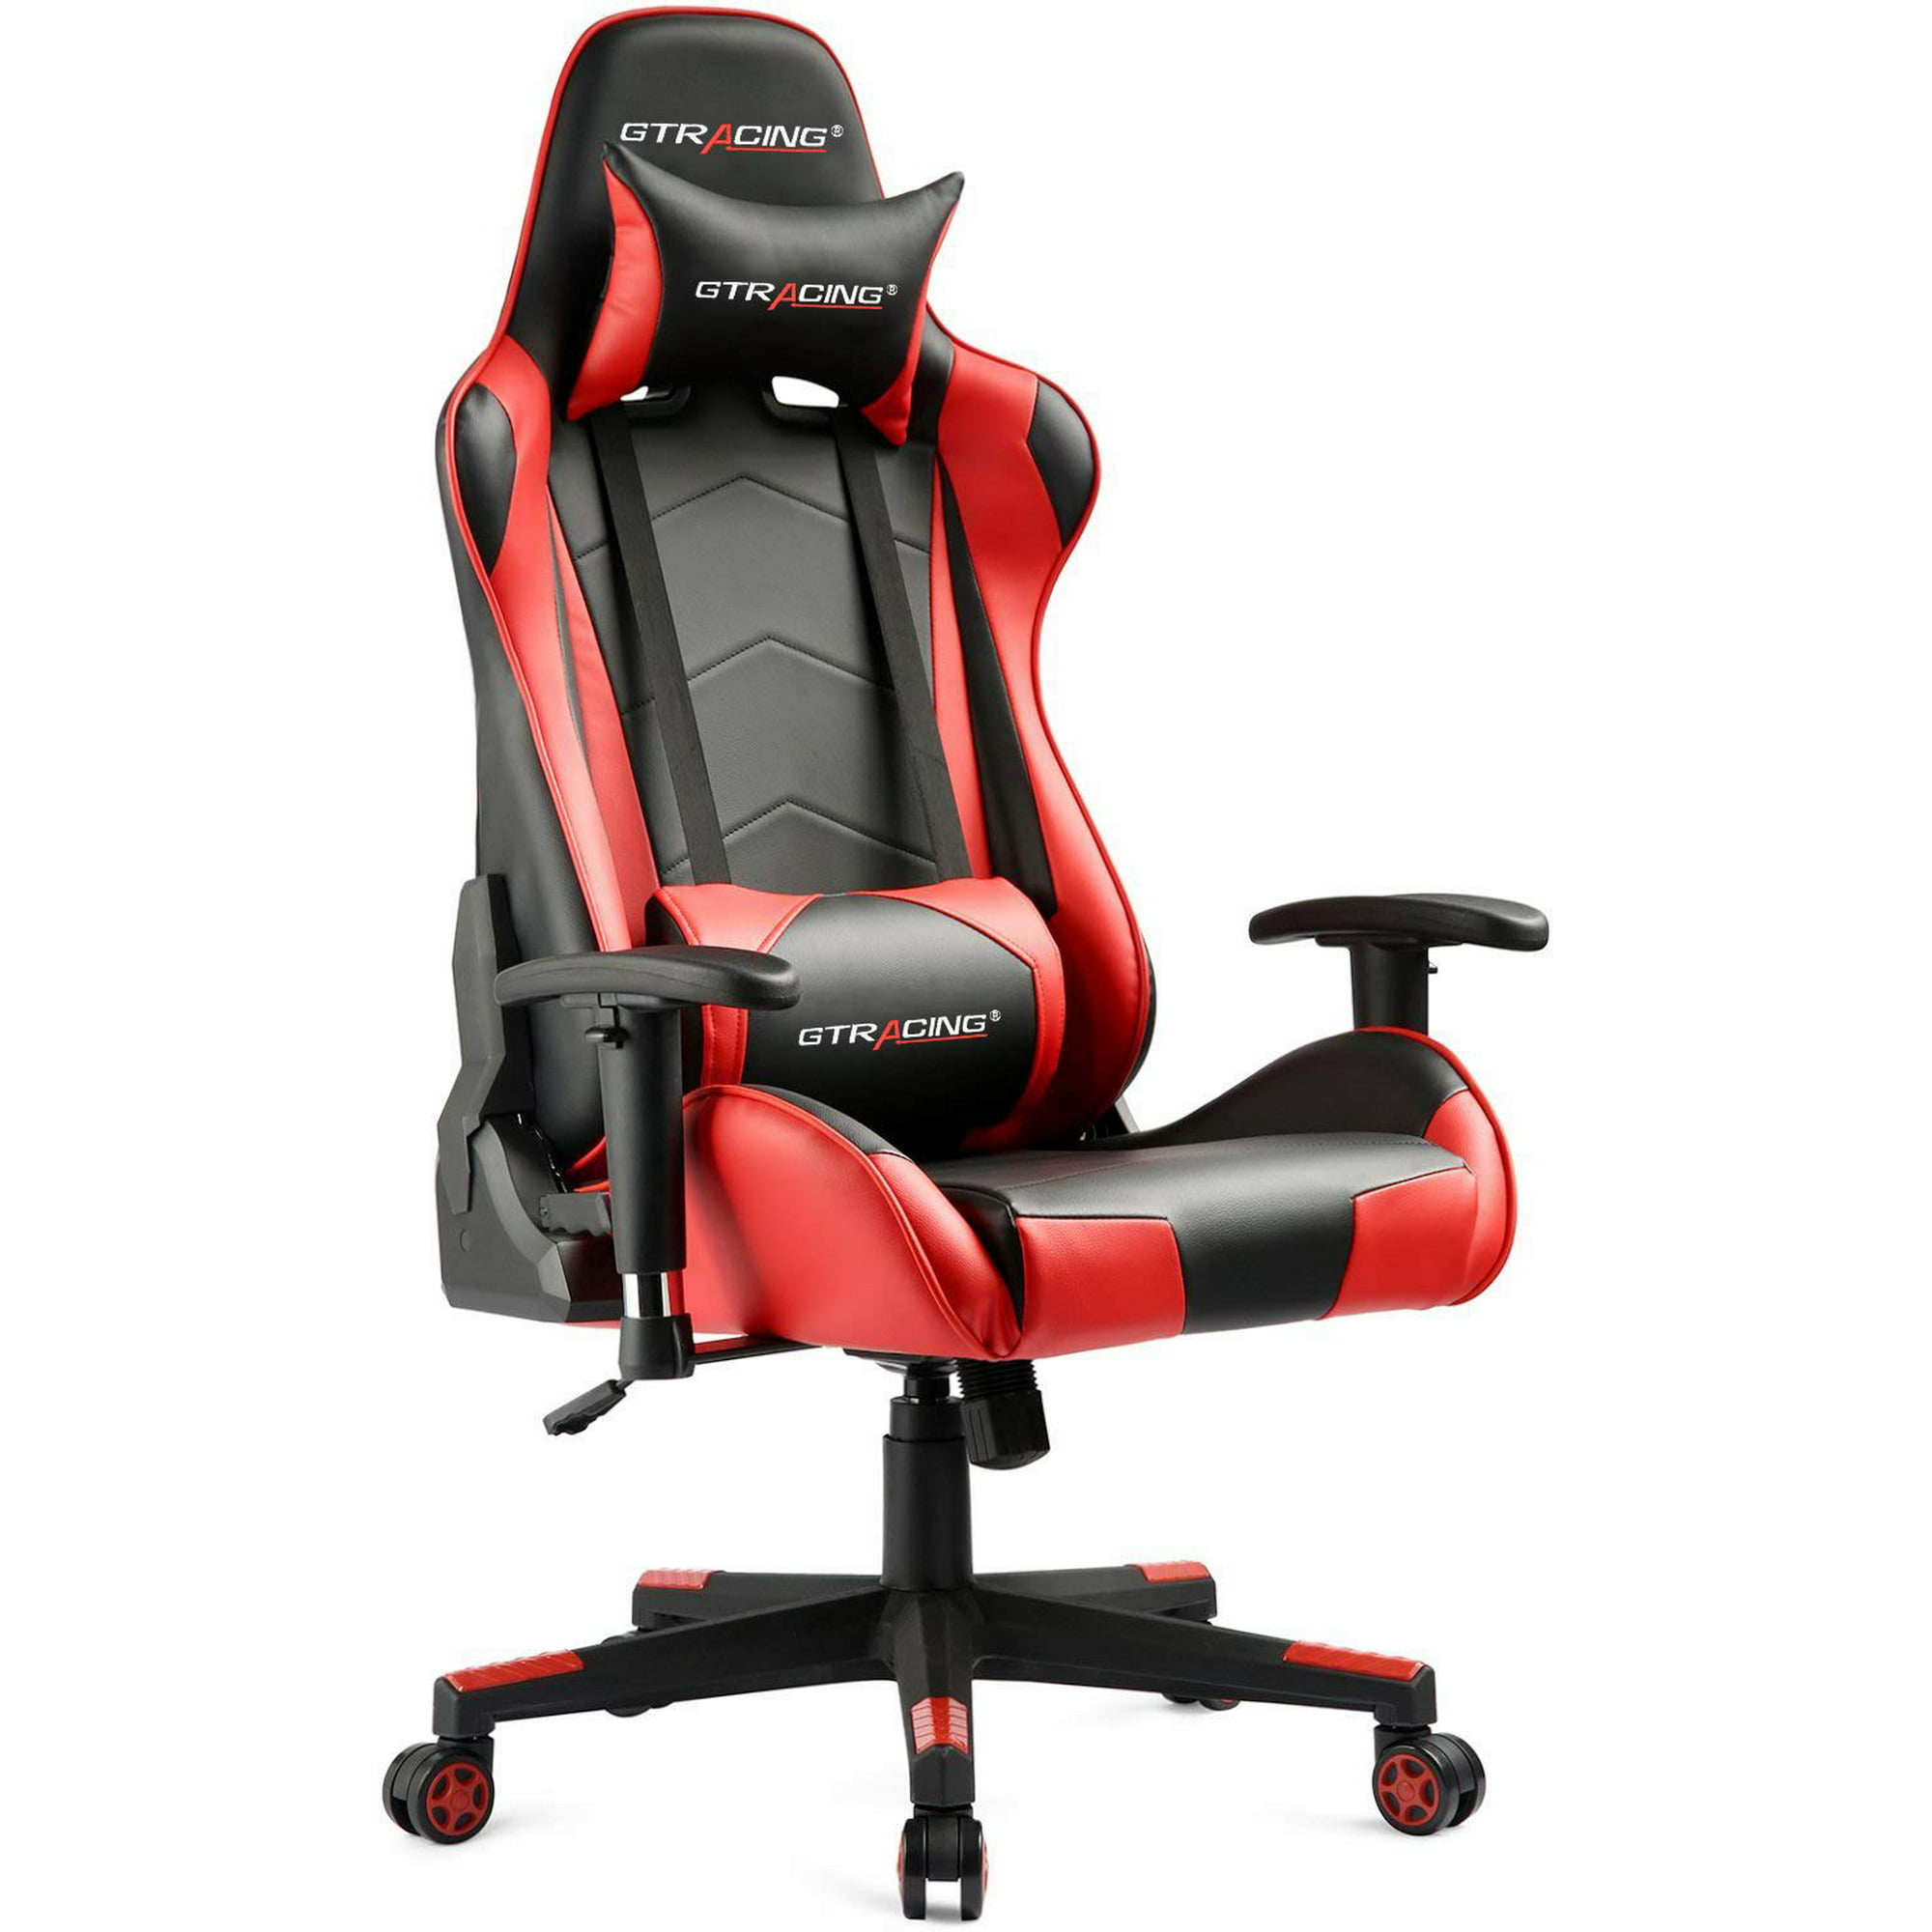 Gtracing Gaming Chair Racing Office Computer Chair Pu Leather Ergonomic Backrest And Seat Height Adjustable Recliner Swivel Rocker With Headrest And Lumbar Pillow E Sports Chair Red Walmart Canada